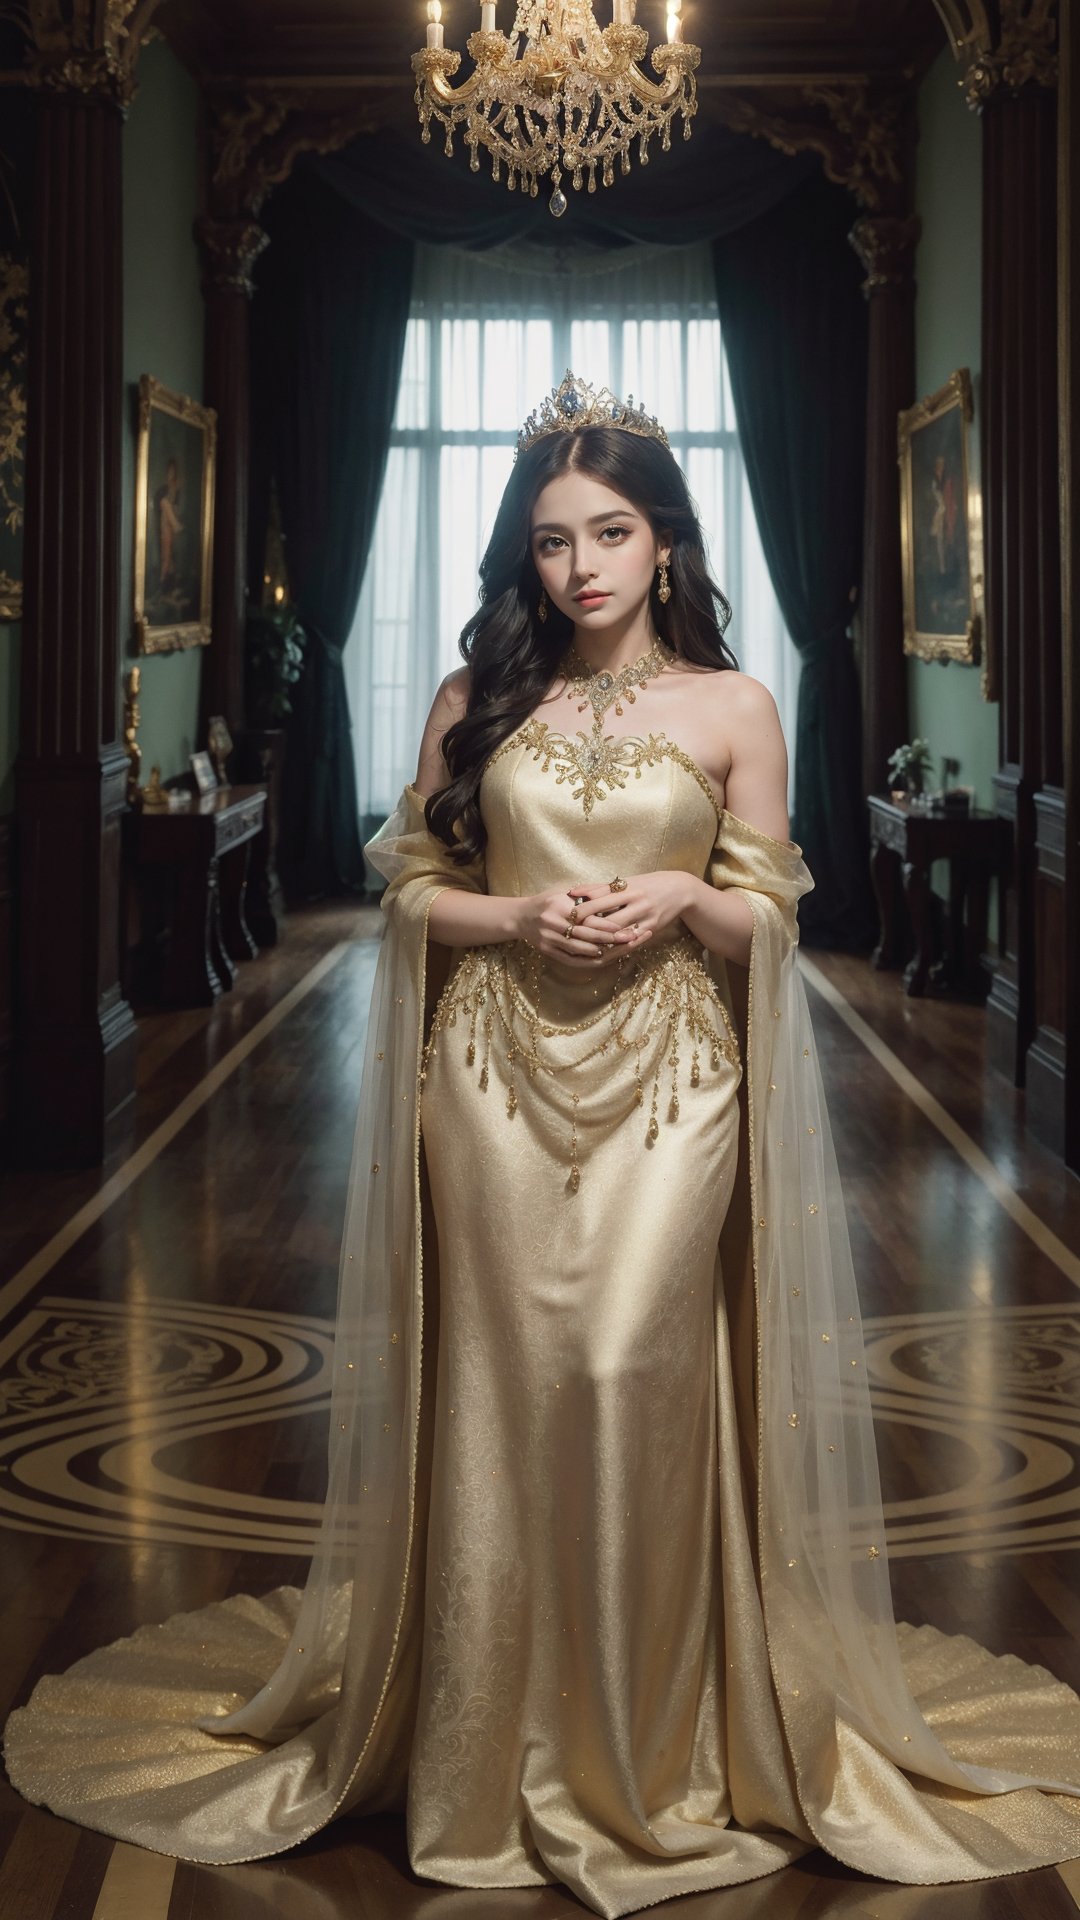 full body, Enchanting Fairy Tale Princess, Royal Castle Setting, Soft Golden Lighting, Regal Gown, (high resolution:1.2), (royal details:1.15), (fairy tale princess:1.1), (majestic ambiance:1.2), (golden glow:1.1), (intricate details:1.14), (elegance:1.1), standing<lora:TQSizeSlider:1>, (masterpiece,best quality:1.5)